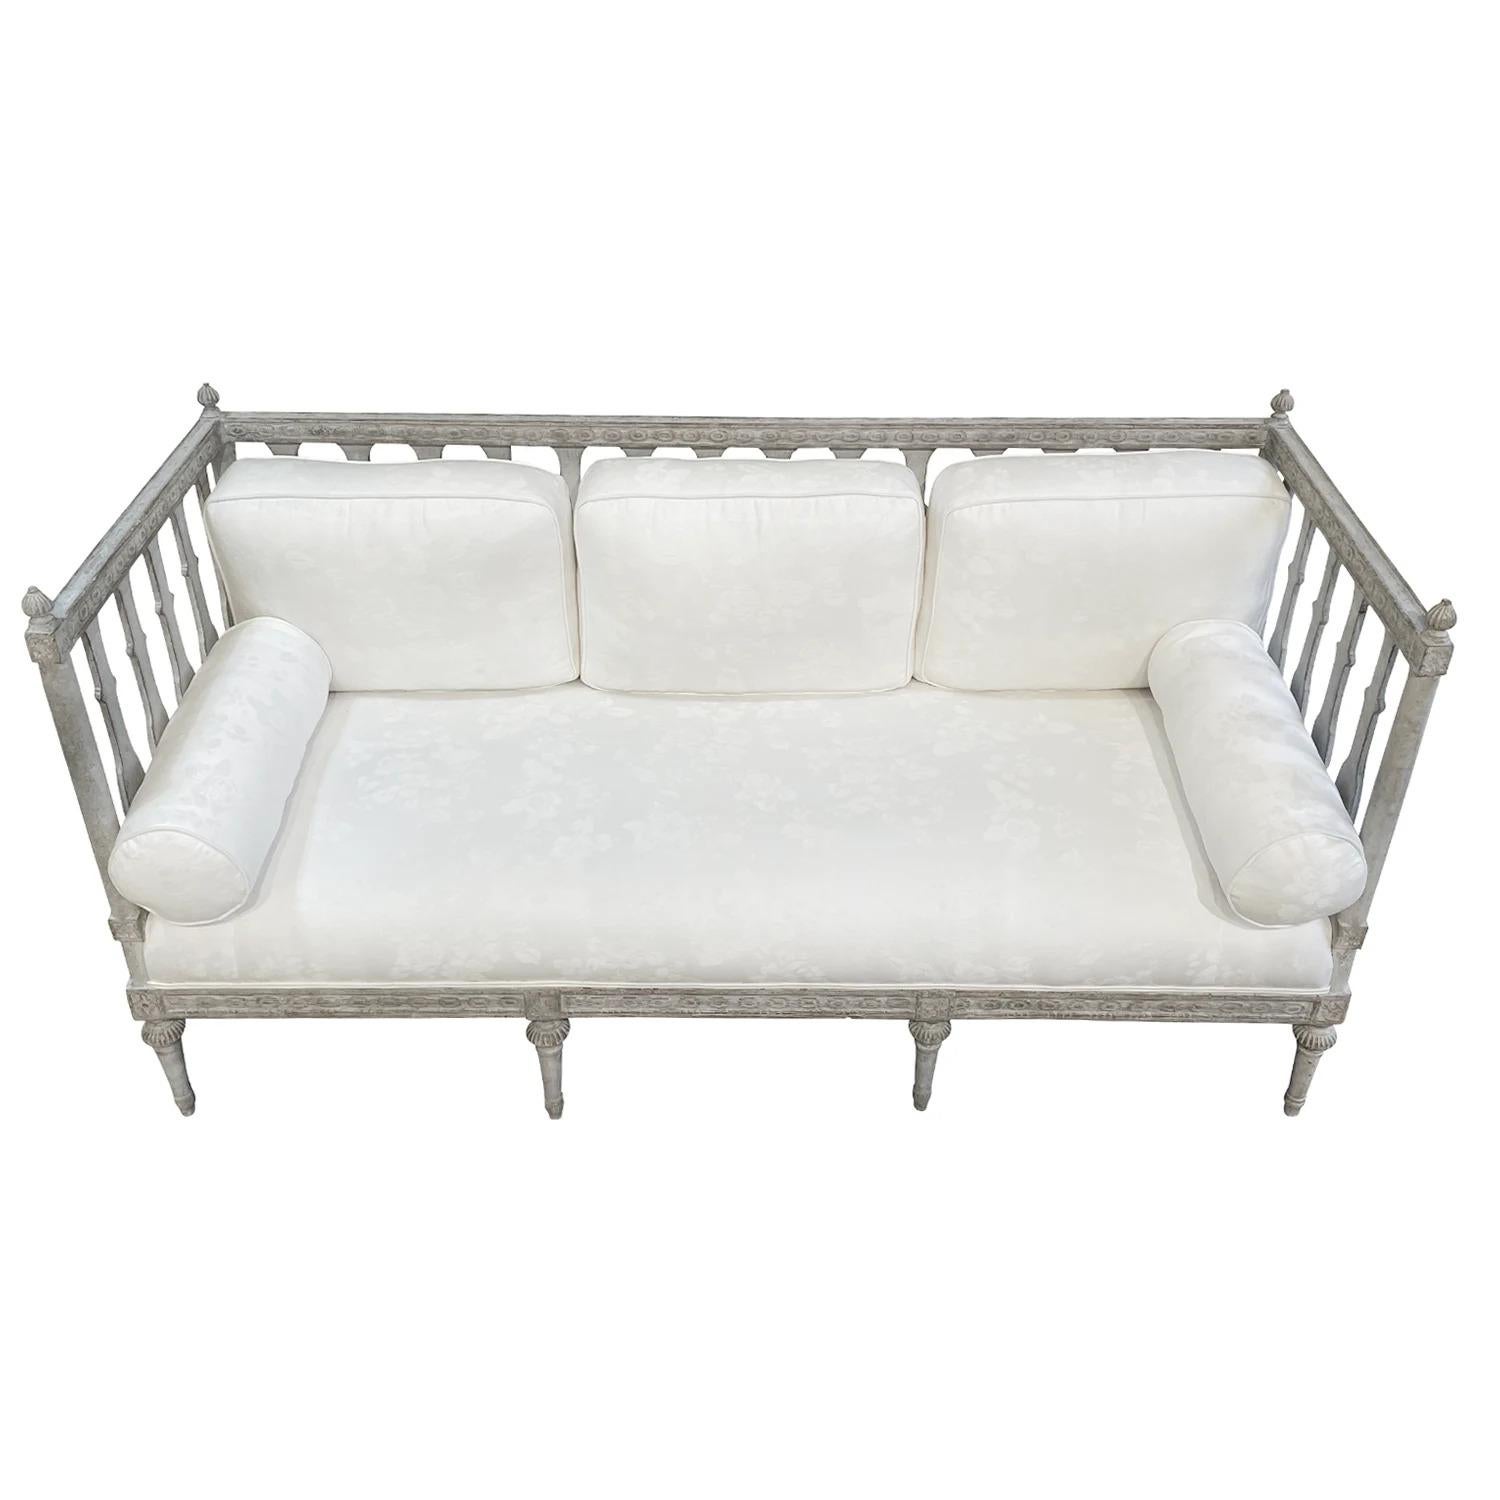 Hand-Carved 18th Century White-Grey Swedish Gustavian Pinewood Sofa Bench, Antique Daybed For Sale